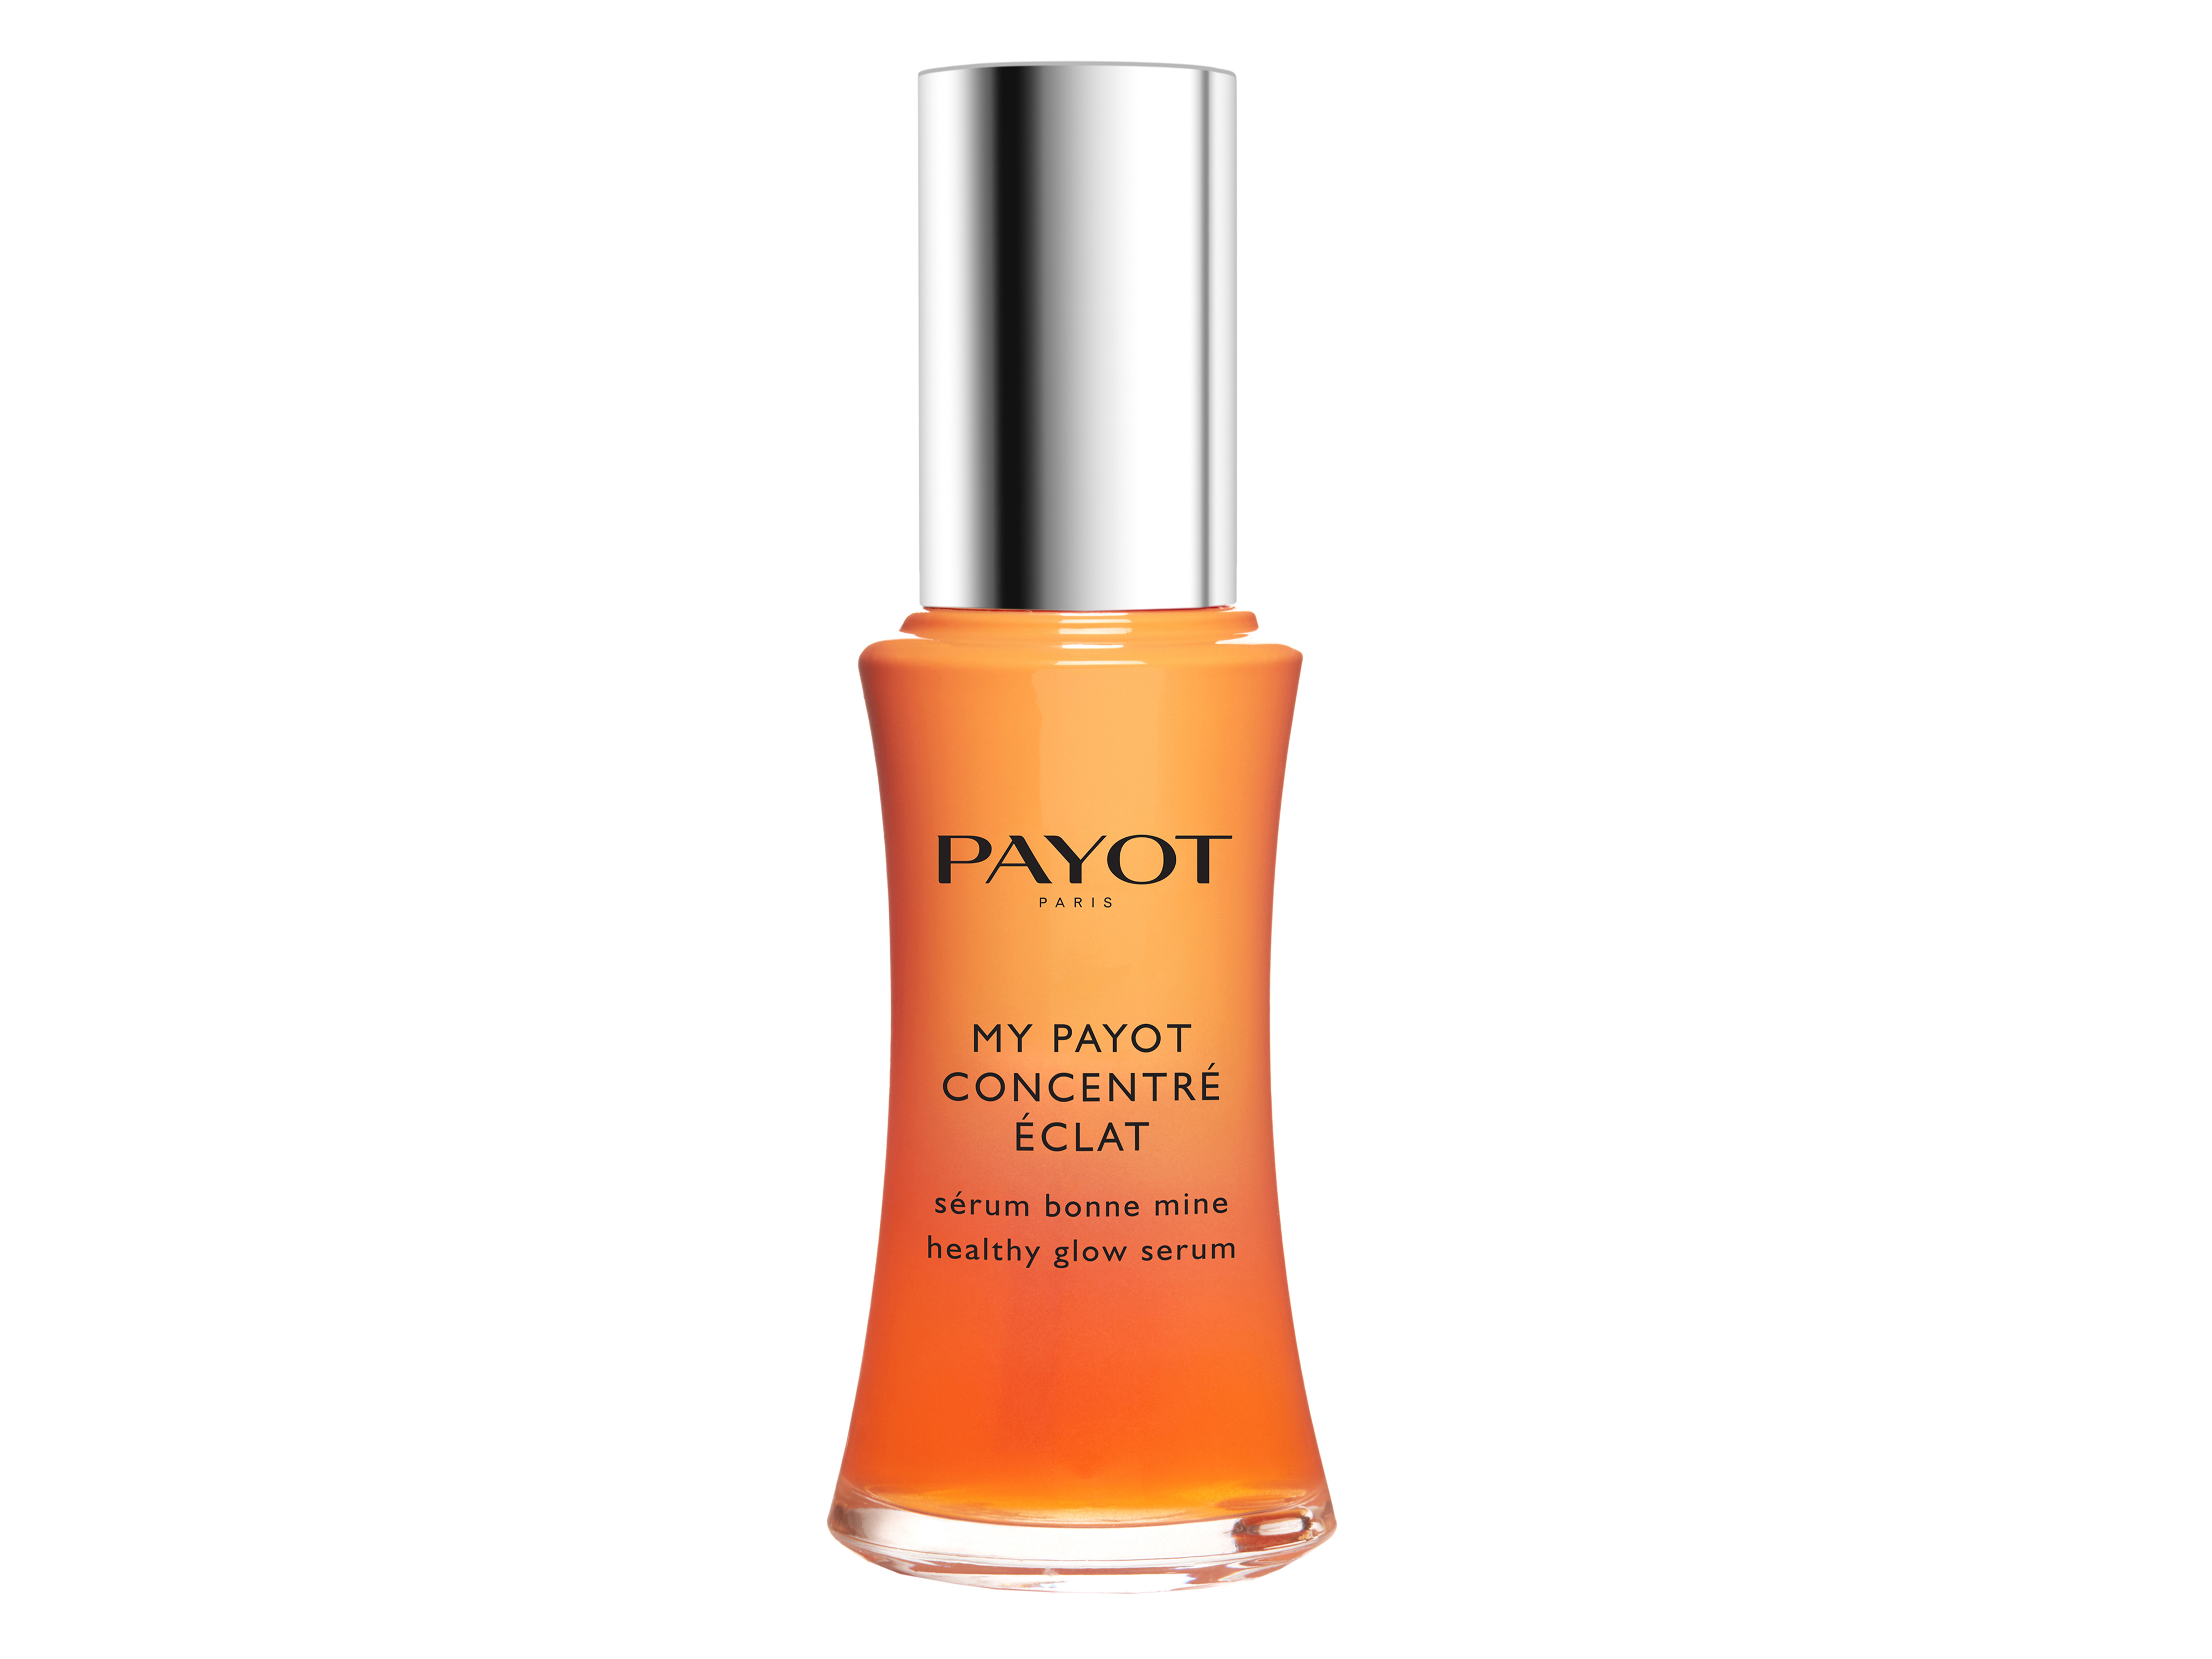 Payot Payot My Payot Concentre Eclat, 30